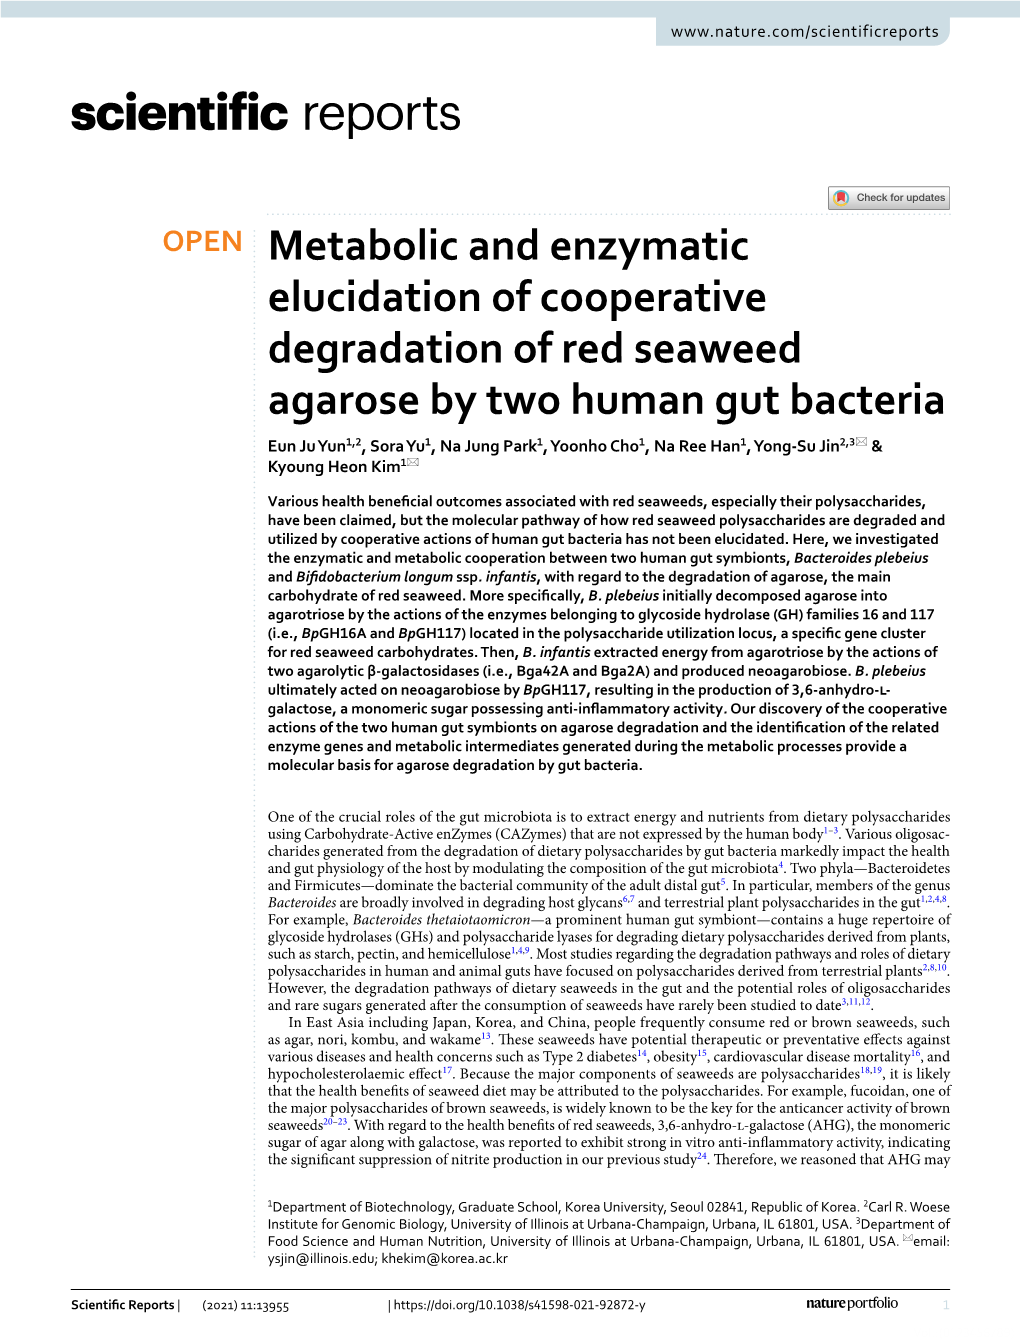 Metabolic and Enzymatic Elucidation of Cooperative Degradation of Red